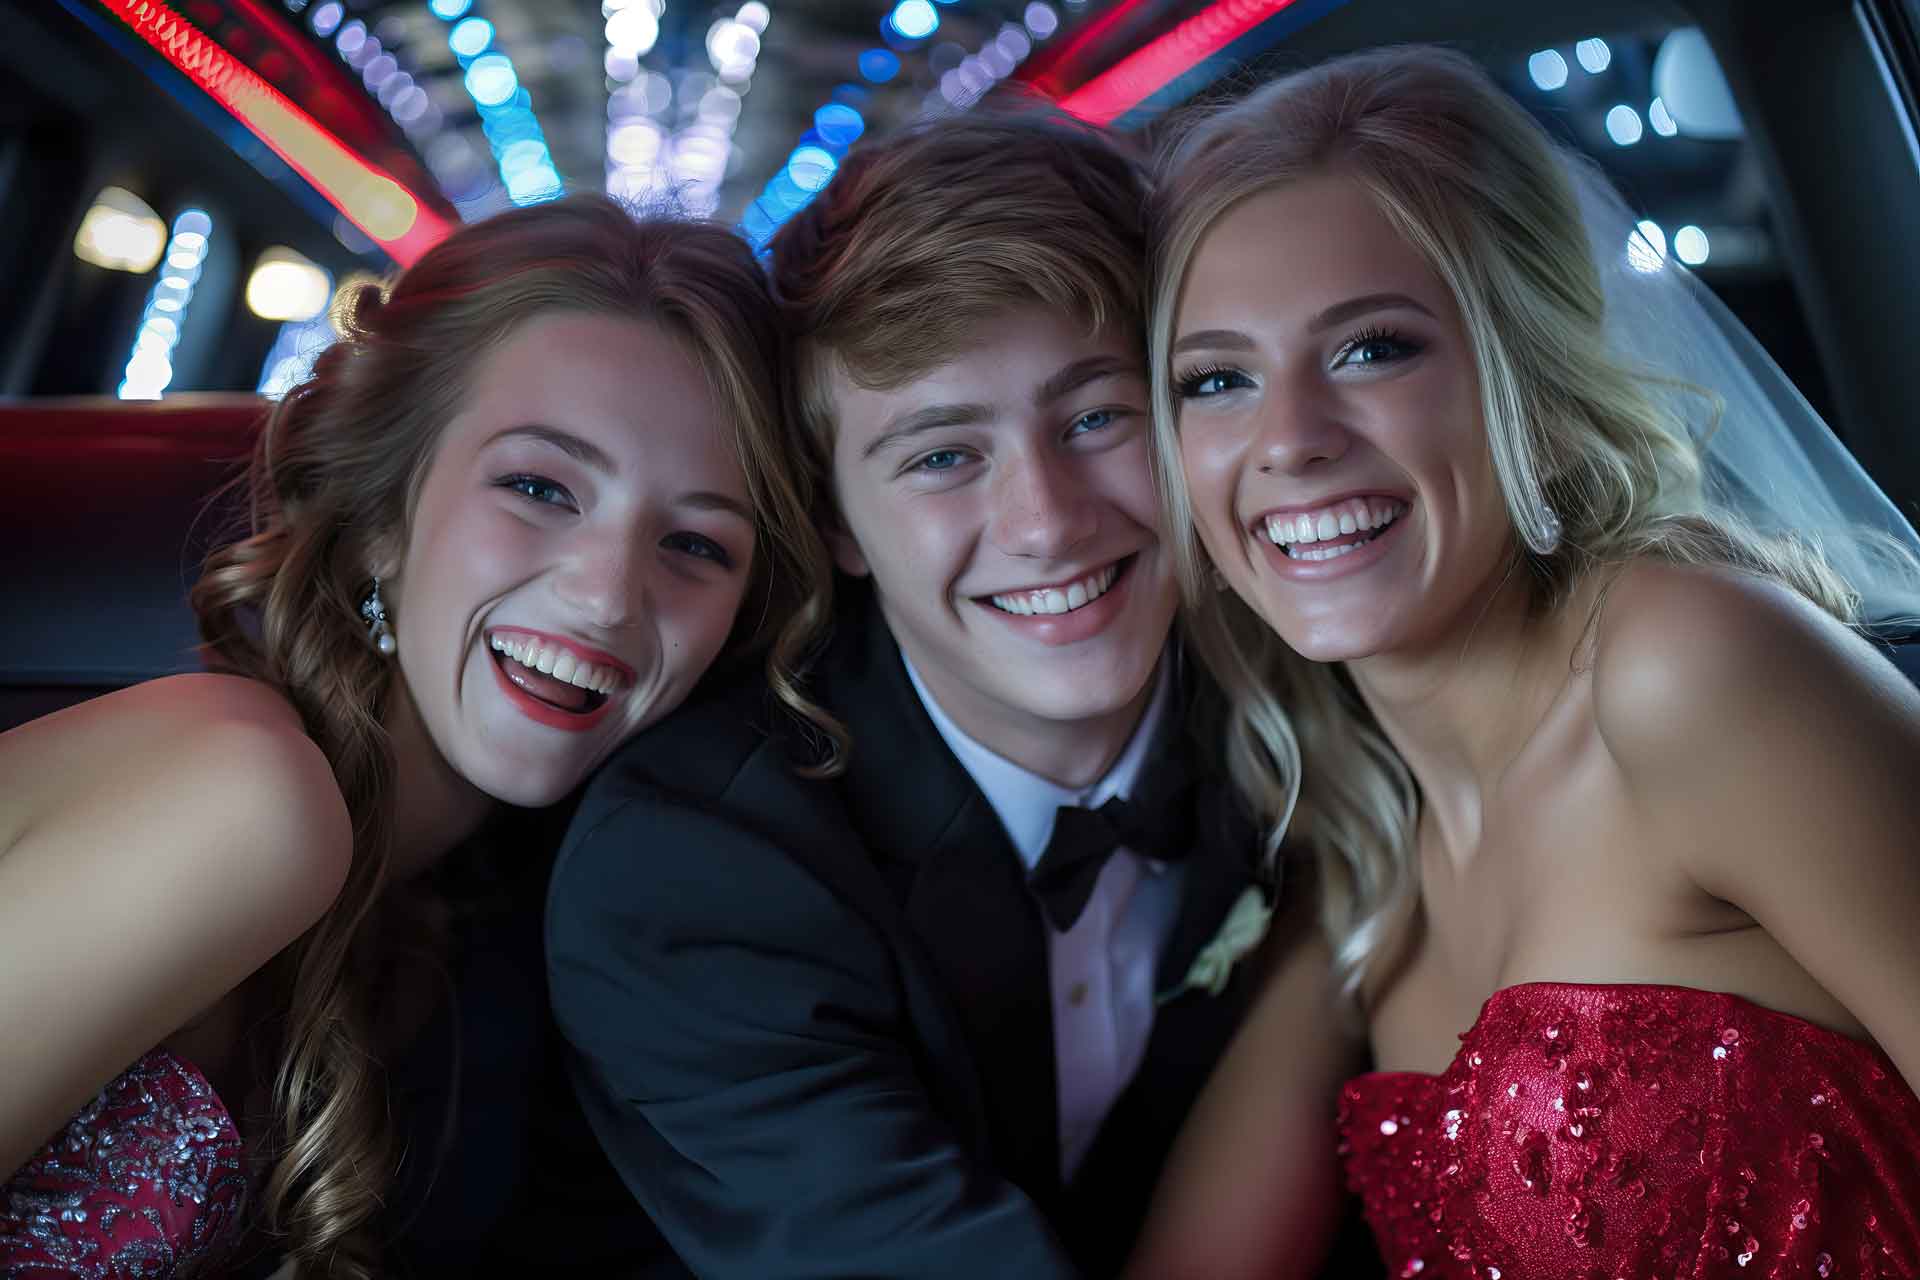 Teenagers in prom attire smiling in the back of a limousine